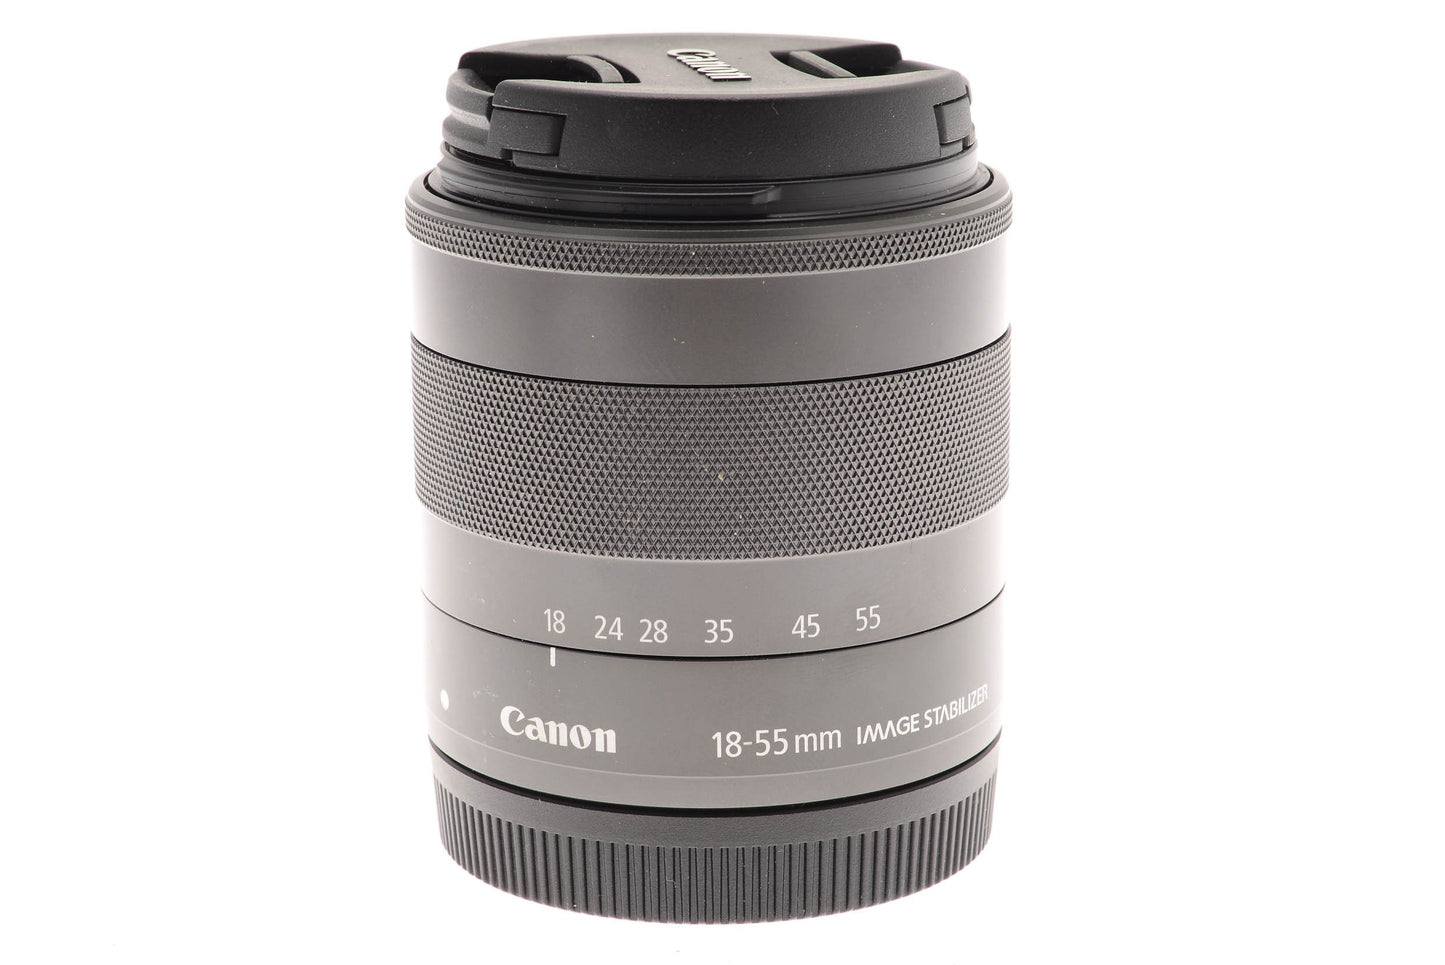 Canon 18-55mm f3.5-5.6 IS STM - Lens